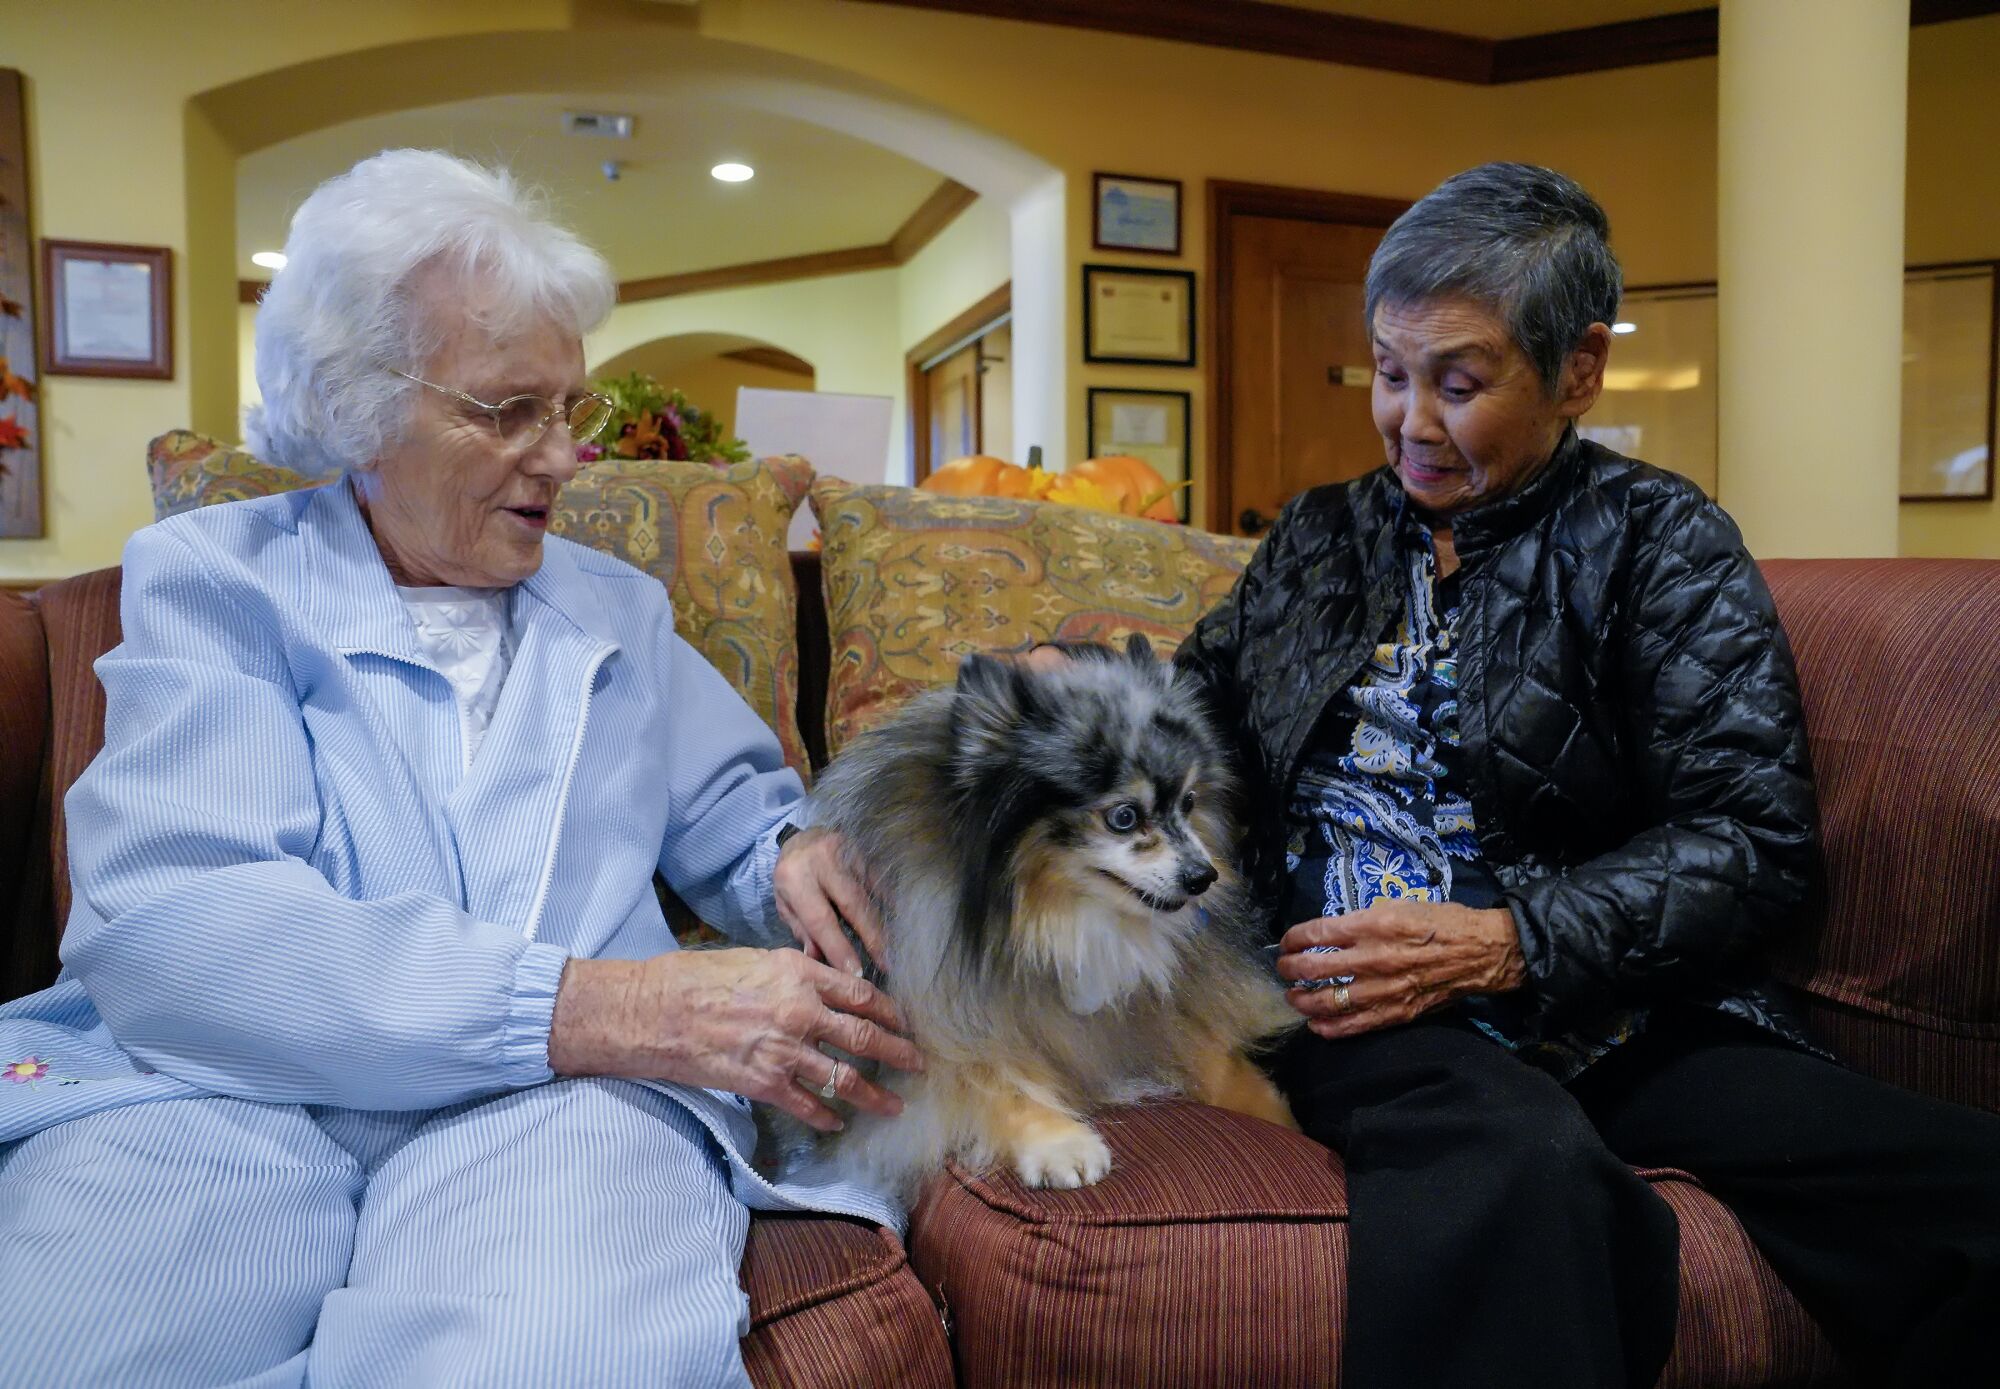 At the GlenBrook Health Center in Carlsbad, Joan Jeske, 86 (l), and Sue Clark, 93 (r), enjoy sitting with Balonee, a Pomeranian with the Helen Woodward Animal Center's animal assisted therapy program. On Monday October 21, 2019 several residents met with three dogs and a bunny rabbit from the therapy program.